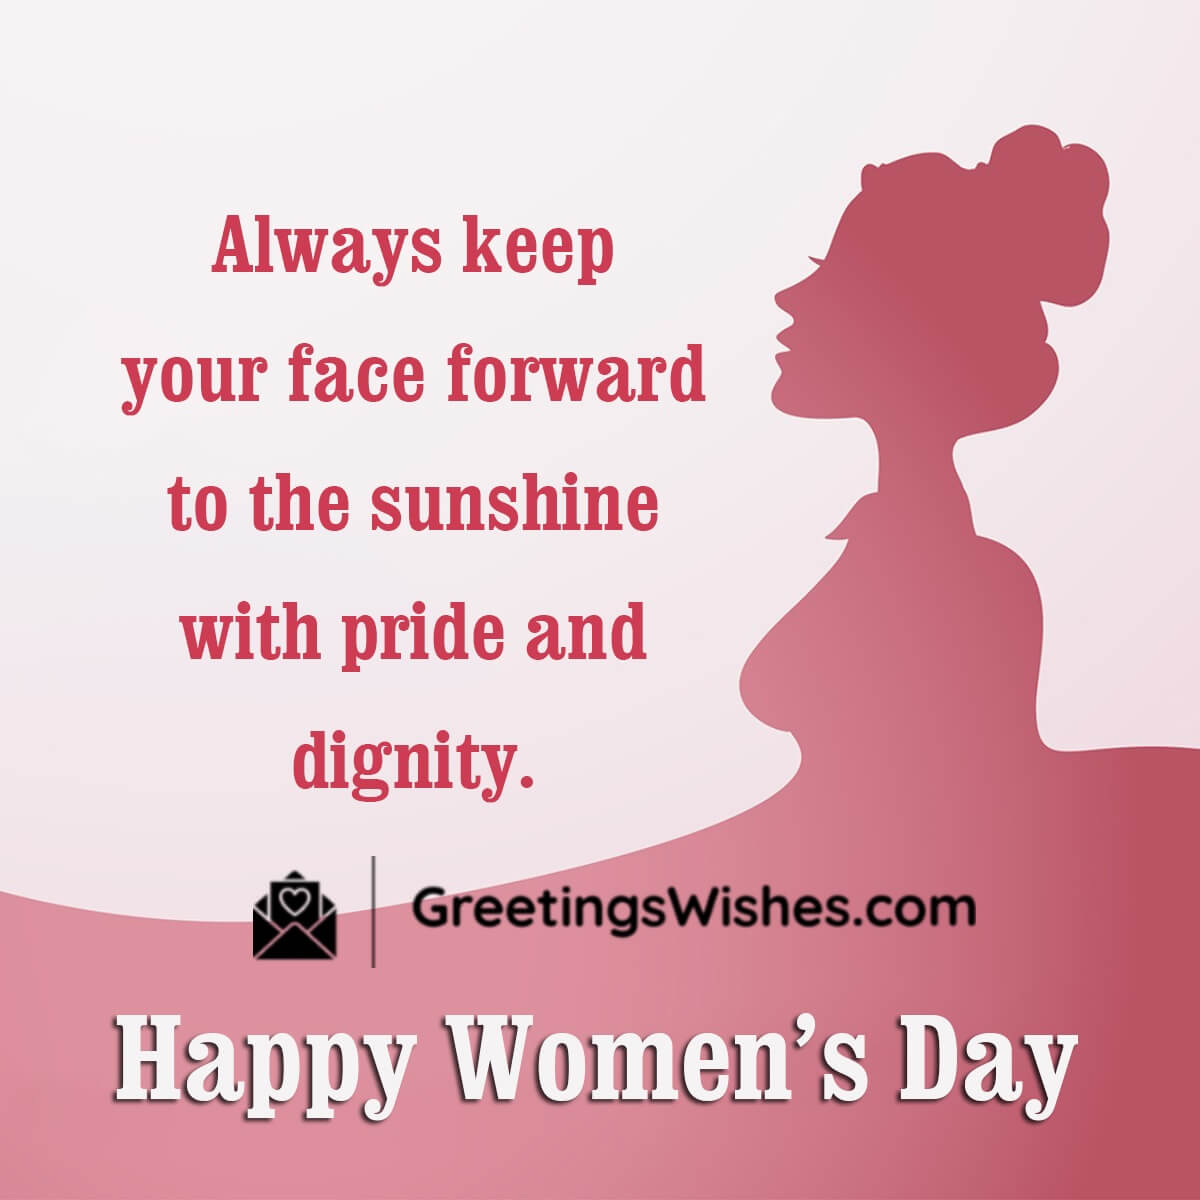 Happy Women’s Day Messages